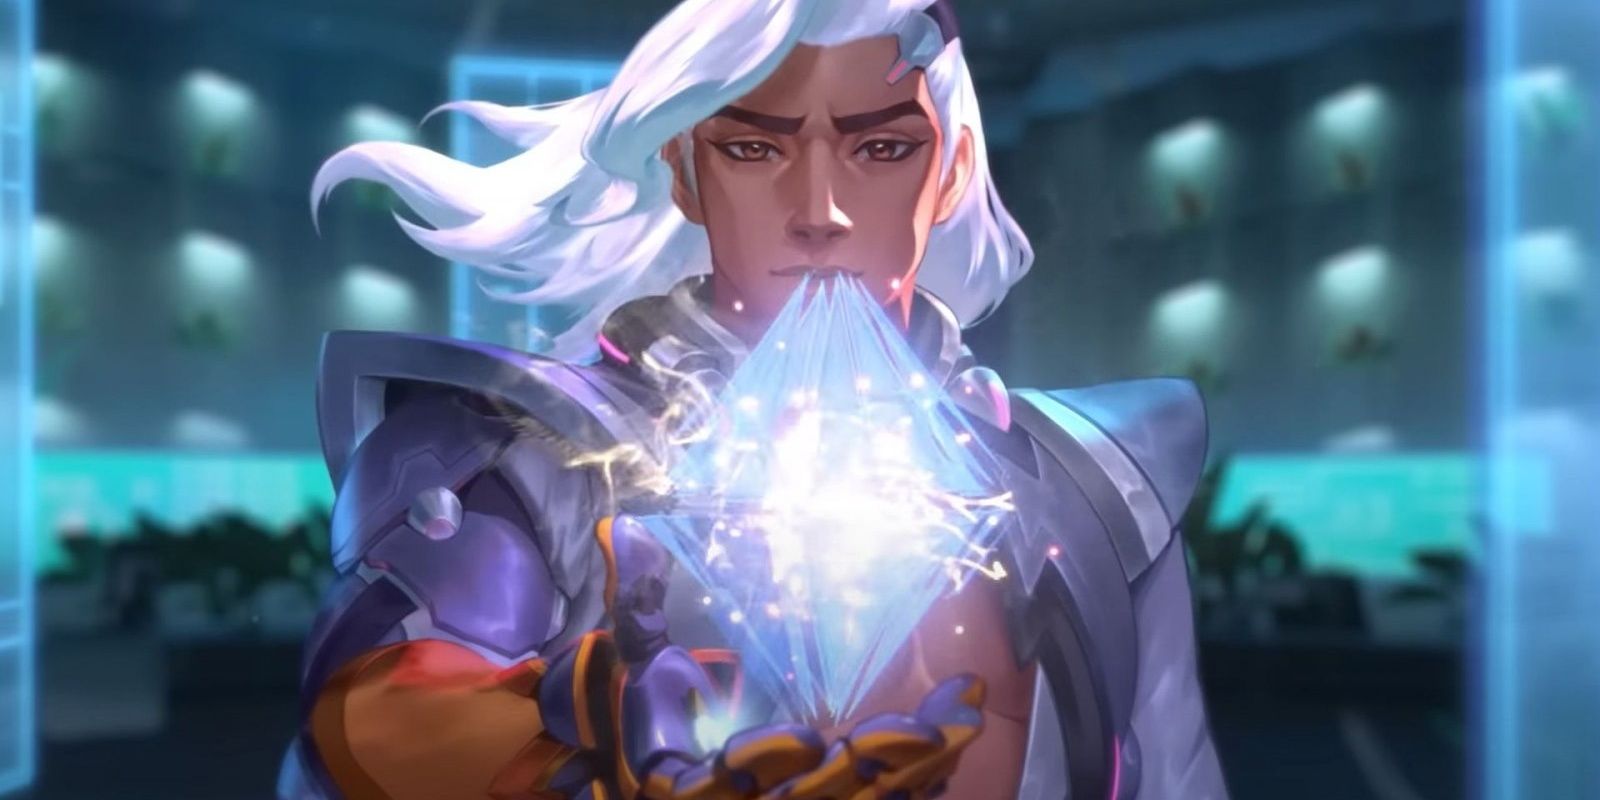 Lifeweaver from Overwatch 2, holding a glowing flower in his hand